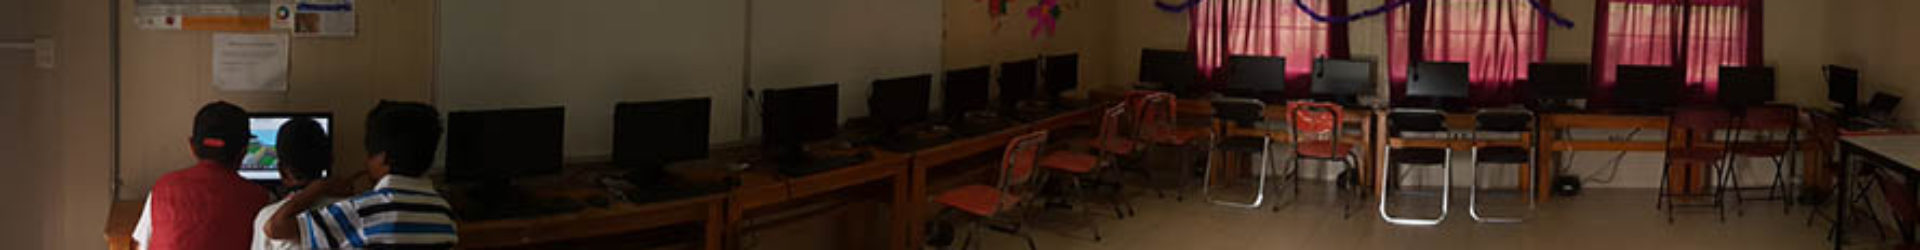 Computers coming to the classroom